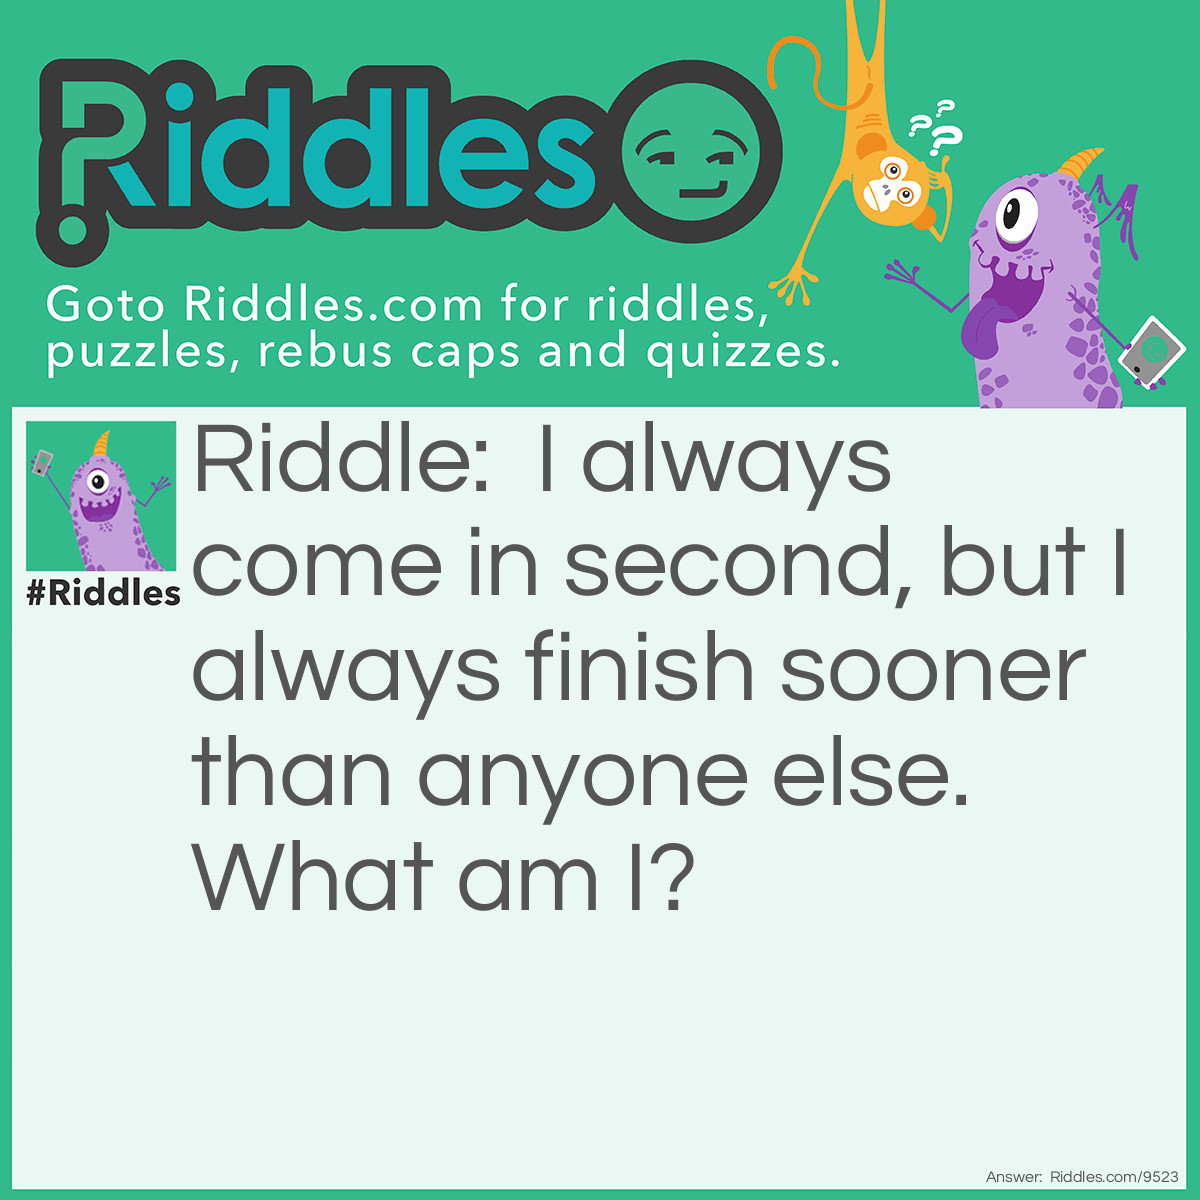 Riddle: I always come in second, but I always finish sooner than anyone else. What am I? Answer: February.